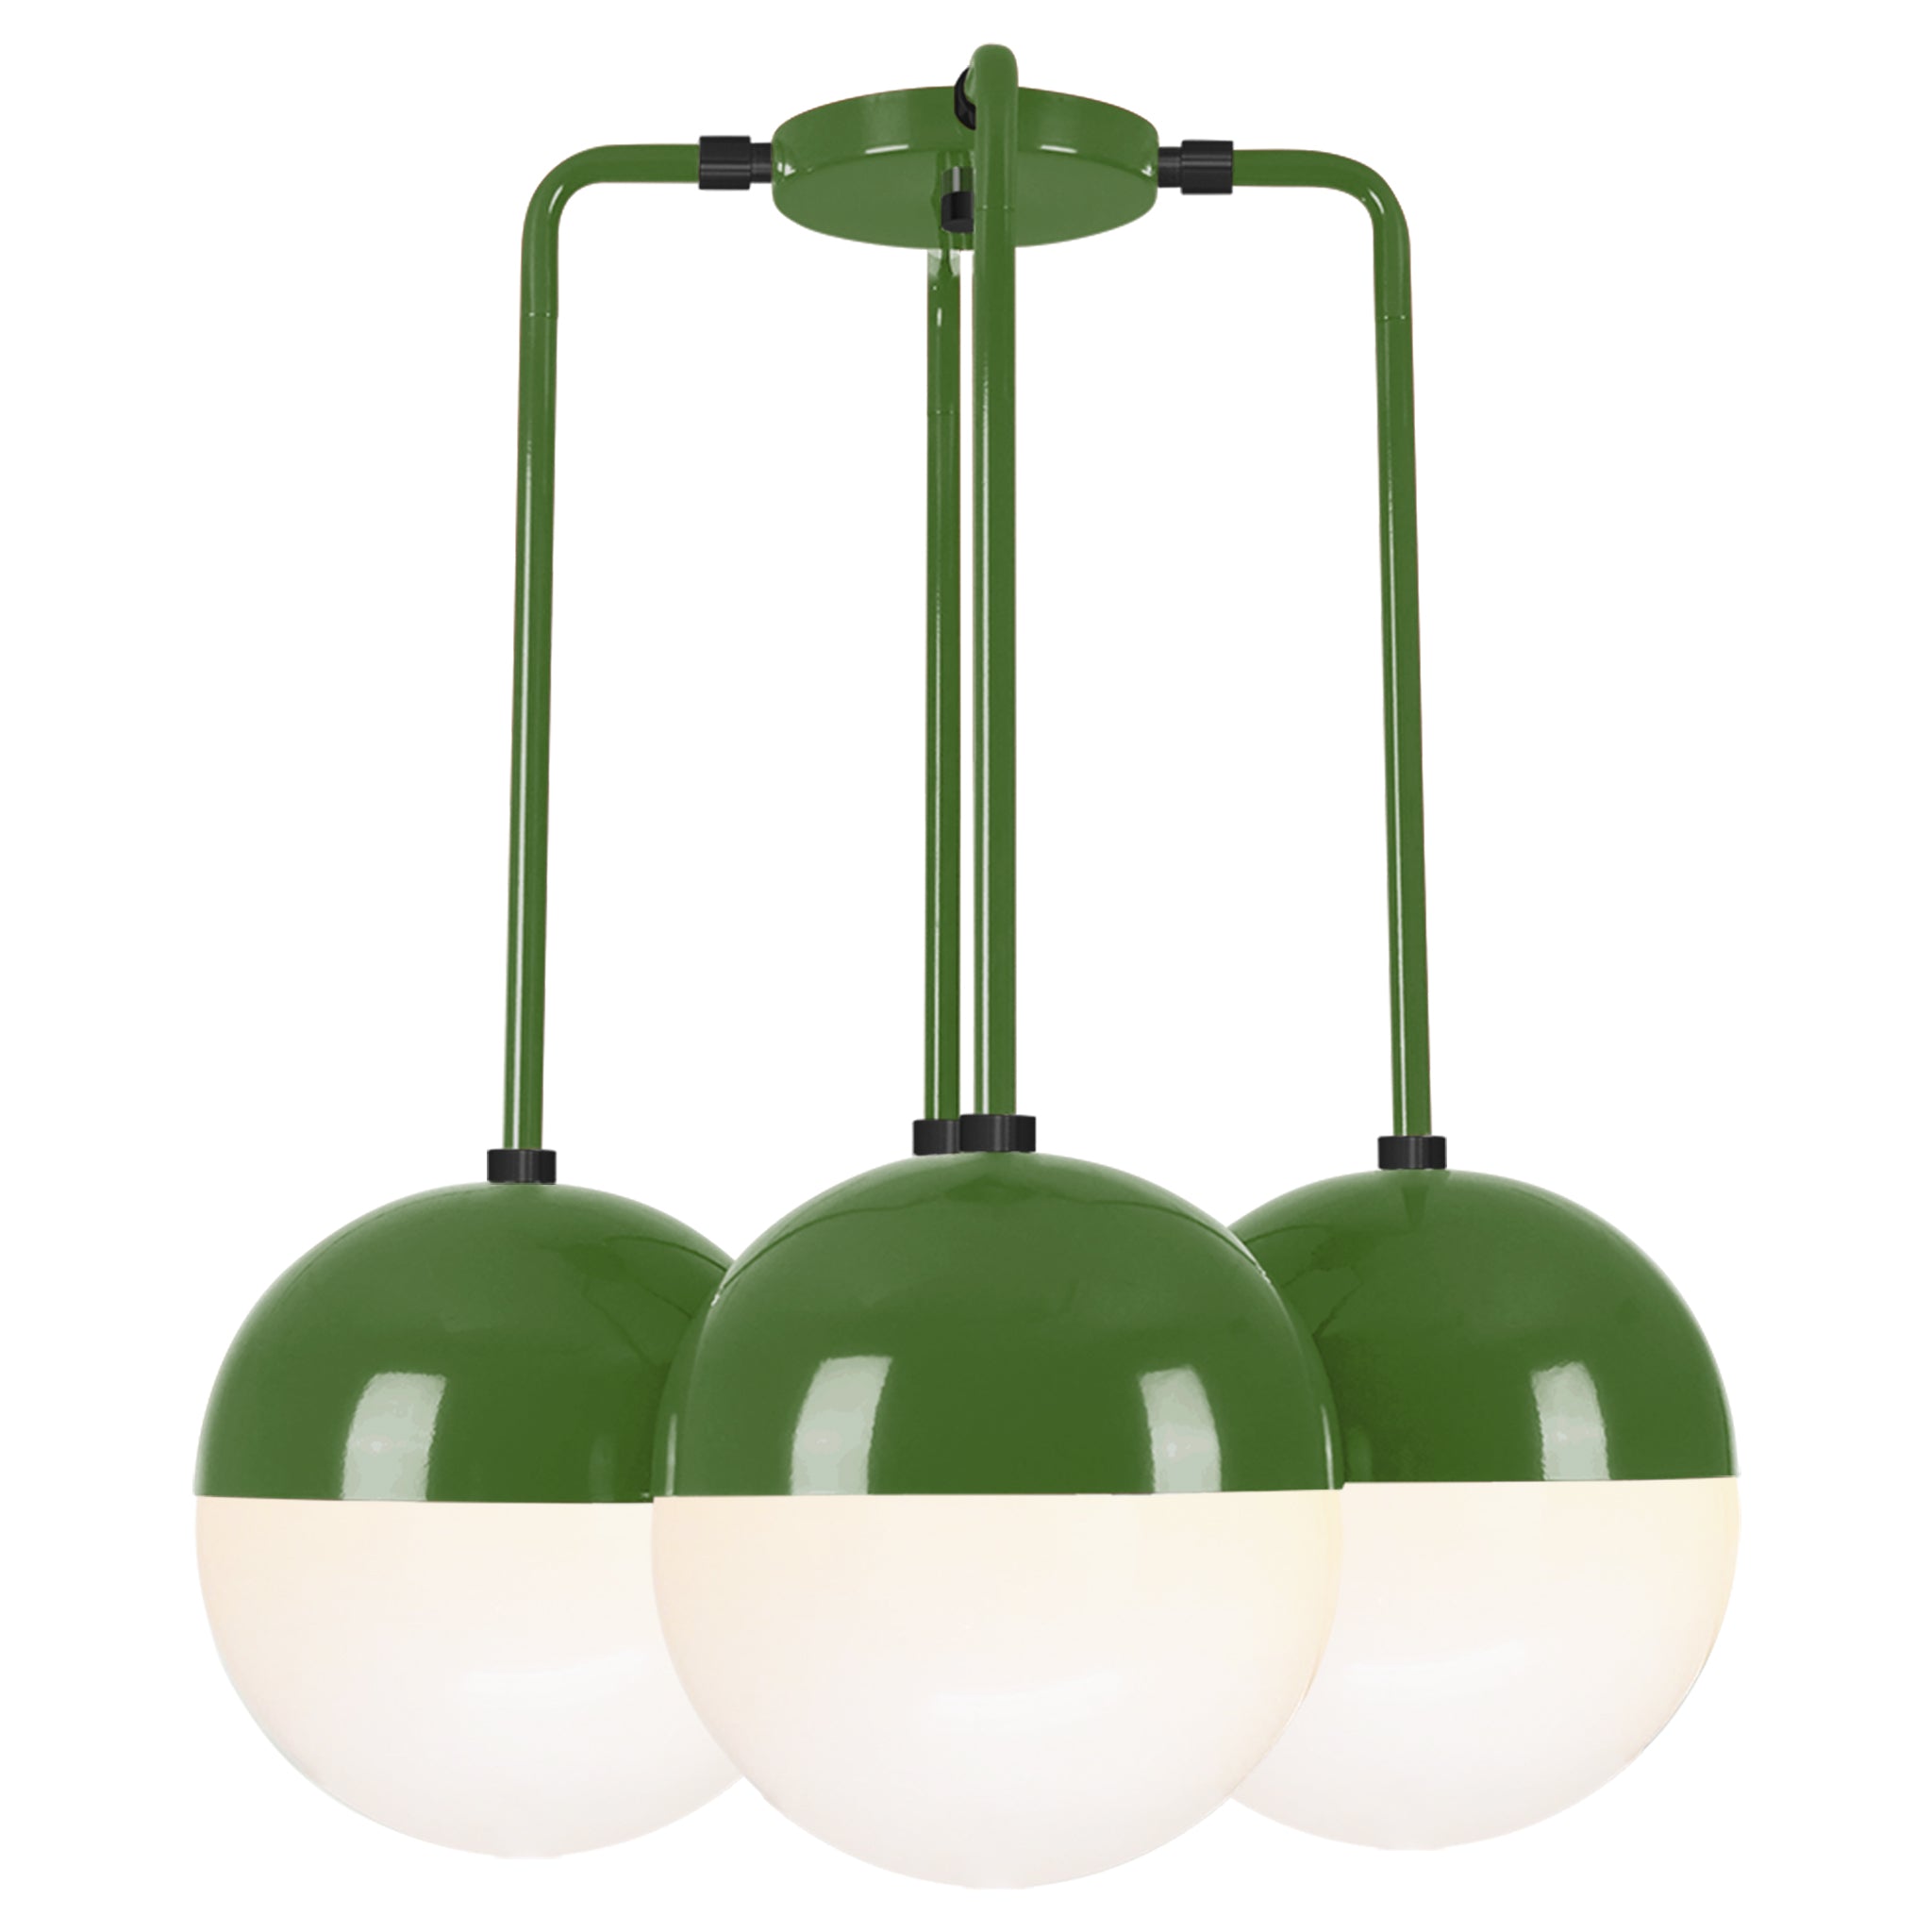 Black and python green color Tetra chandelier Dutton Brown lighting